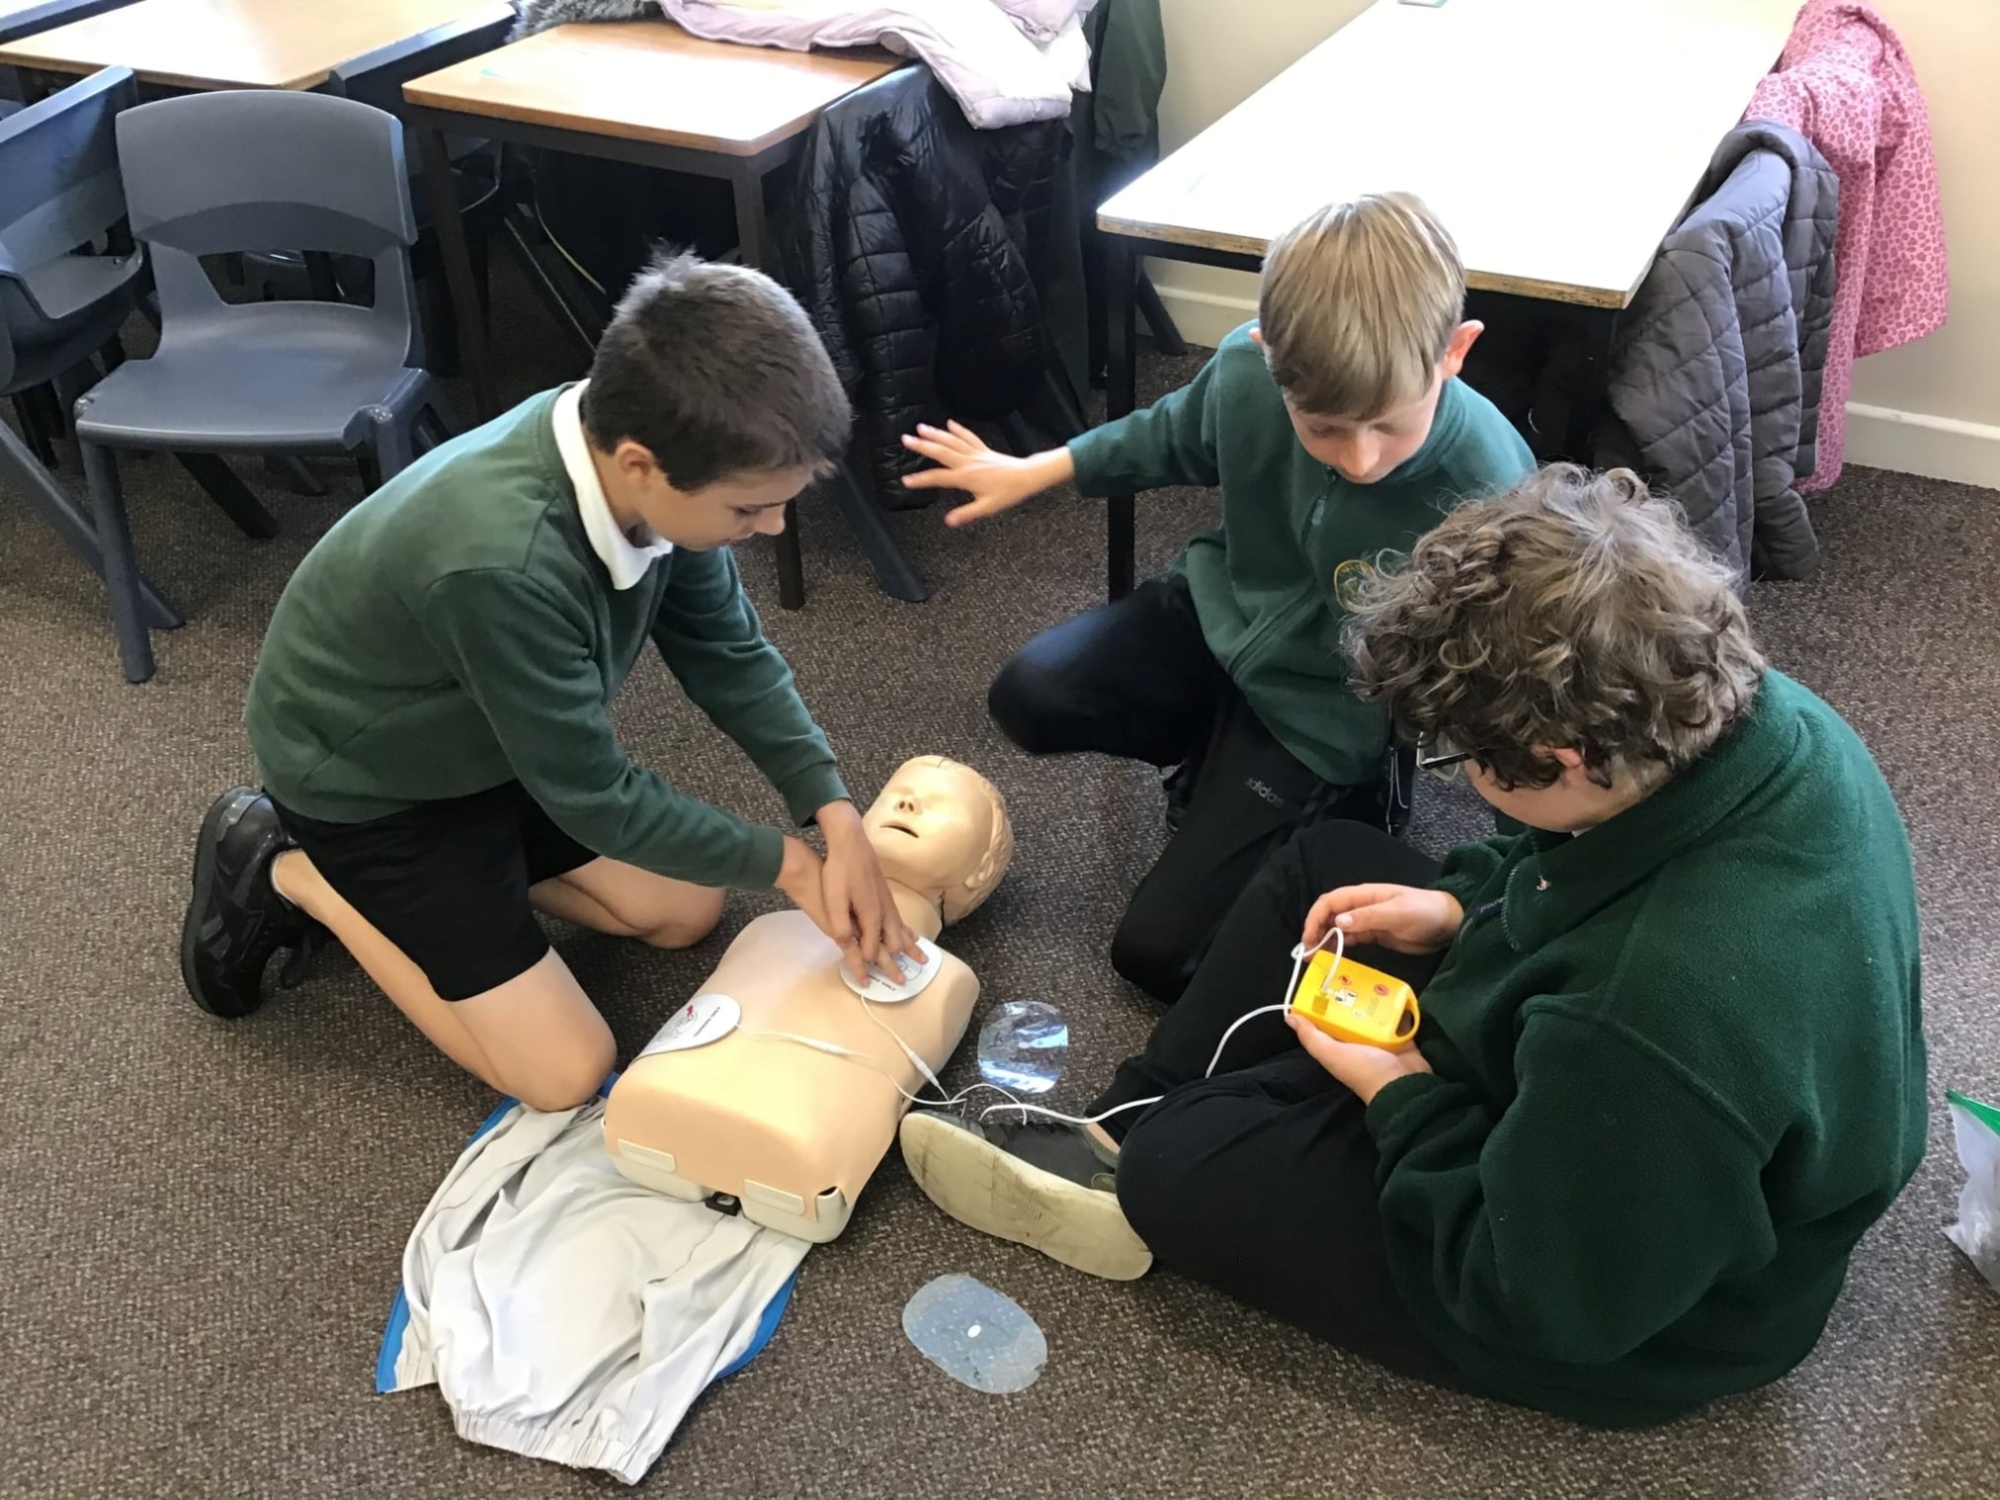 Children performing first aid on a resuscitation device